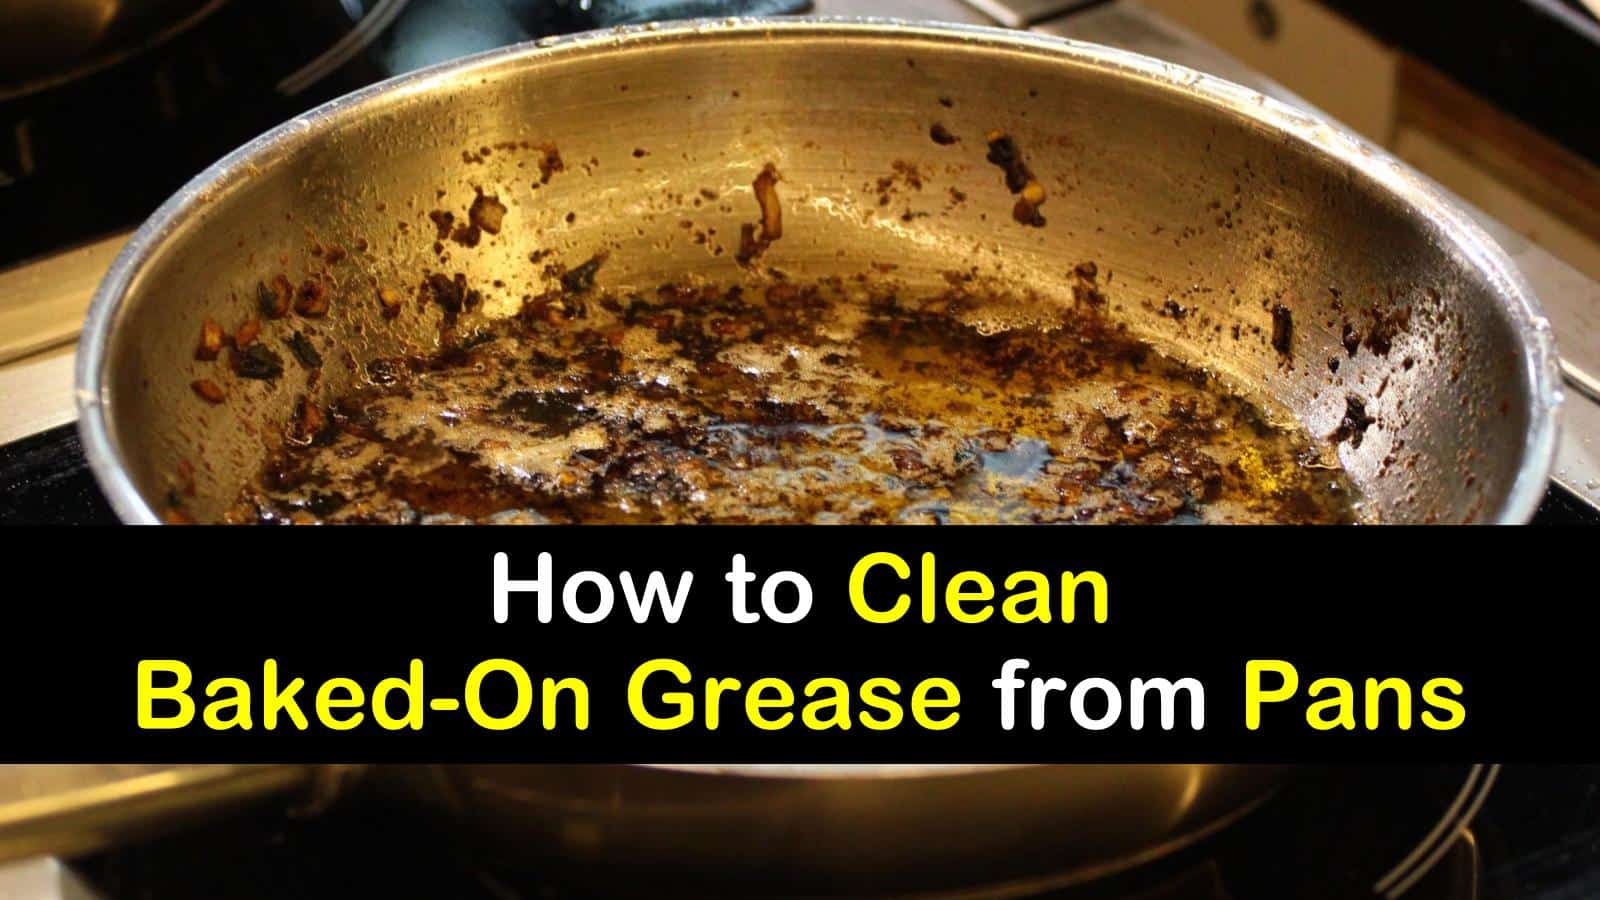 18 Fantastic Ways to Clean Baked-On Grease from Pans